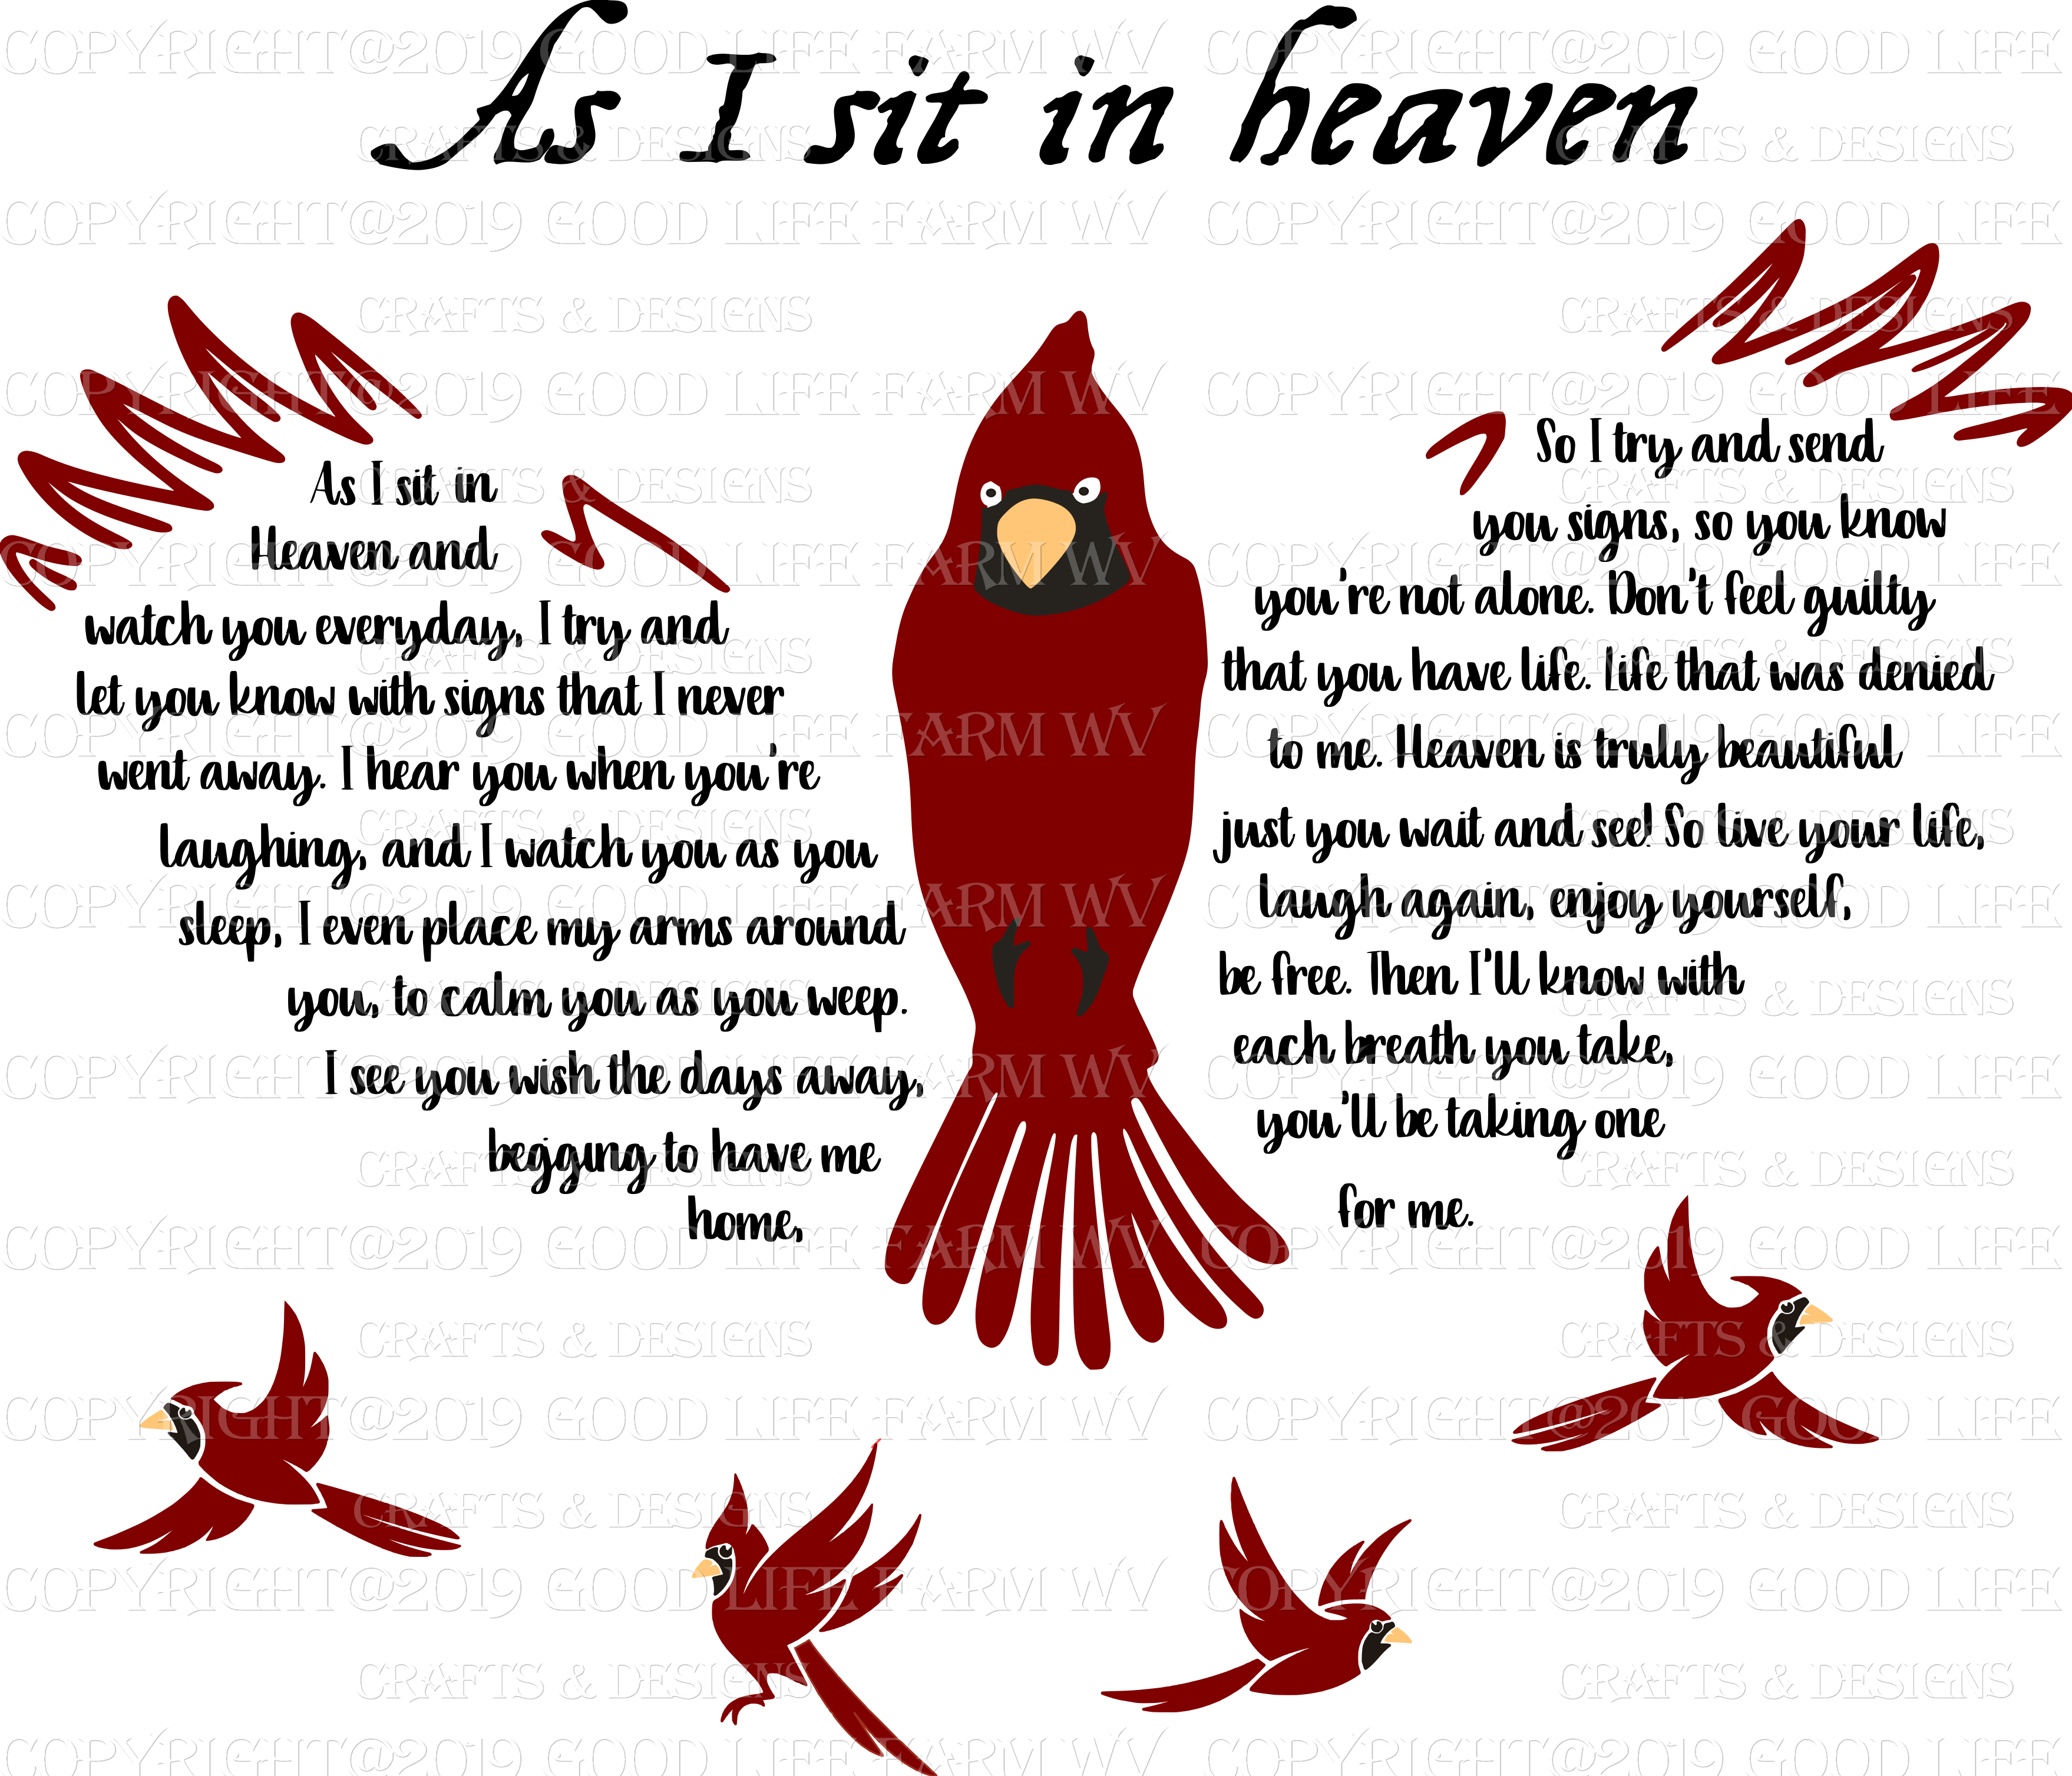 As I Sit In Heaven Cardinal Svg Jpeg Png Eps Cutting File Inst Good Life Farm Crafts Designs